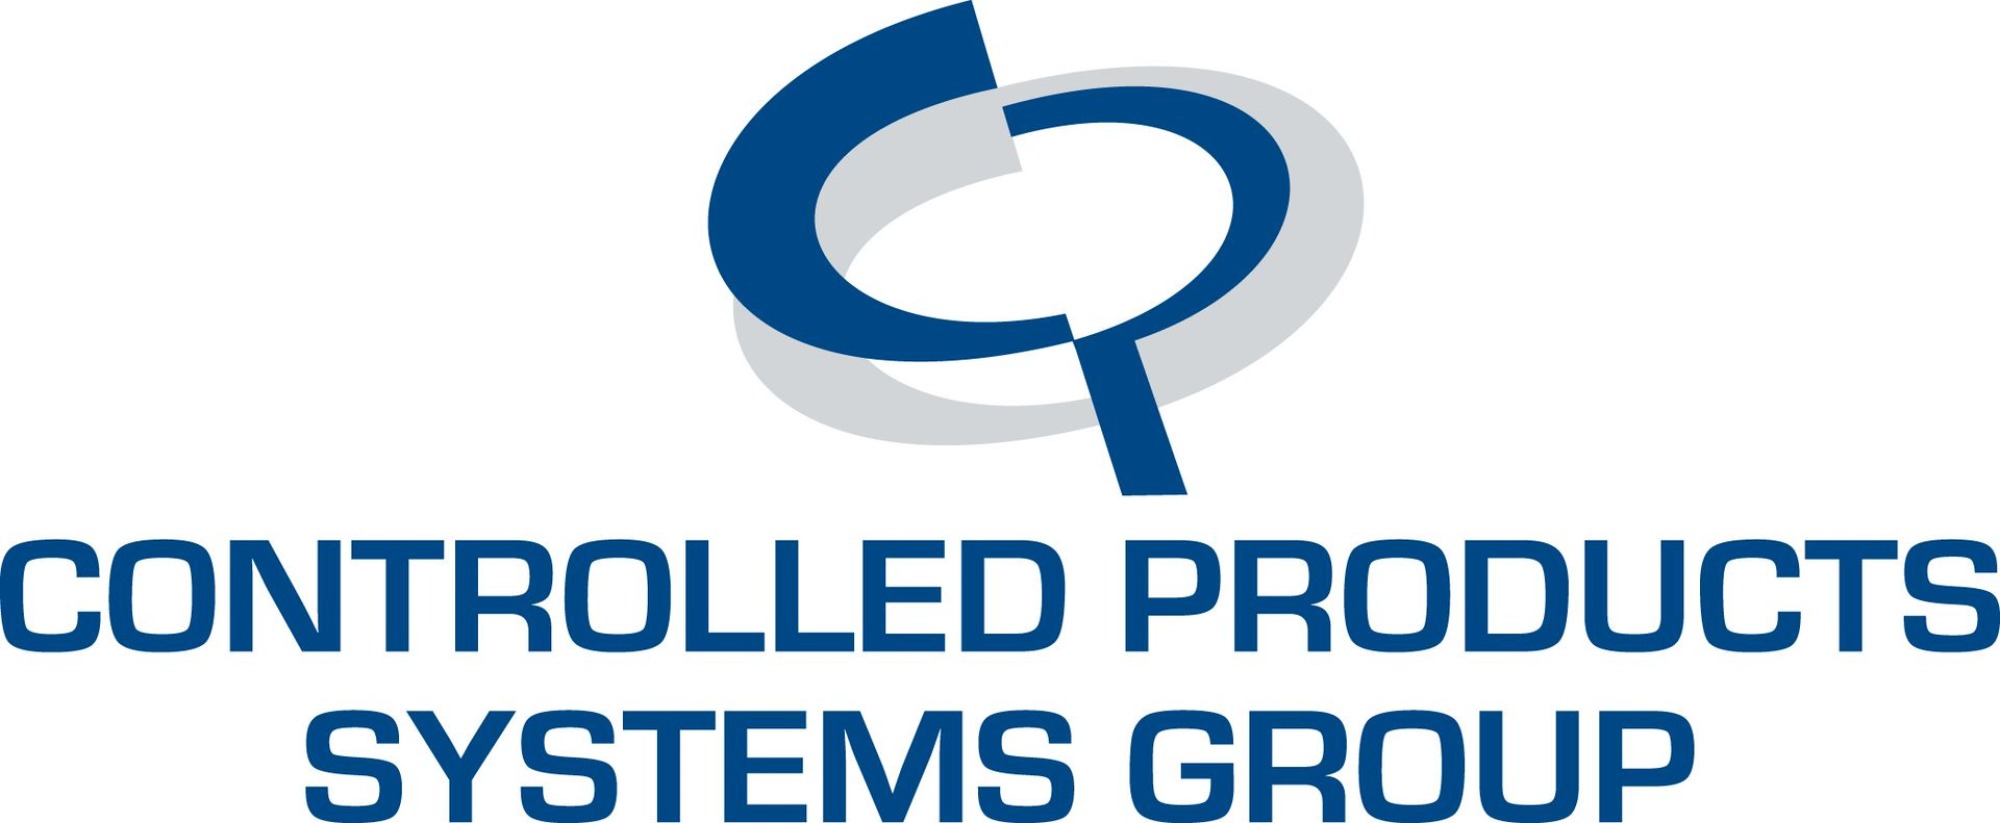 Controlled Products Group